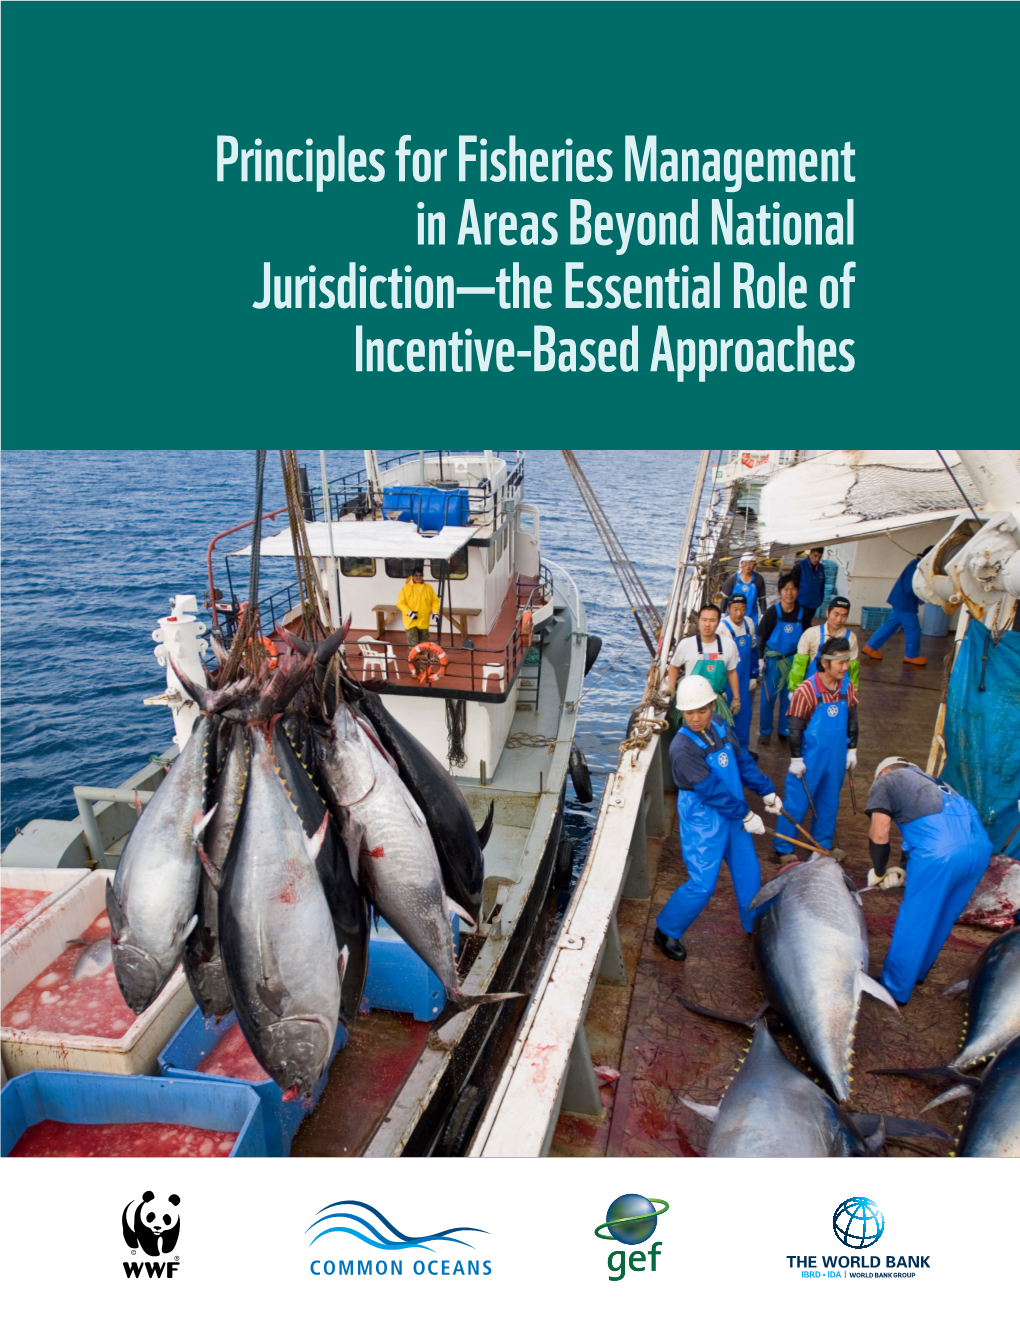 Principles for Fisheries Management in Areas Beyond National